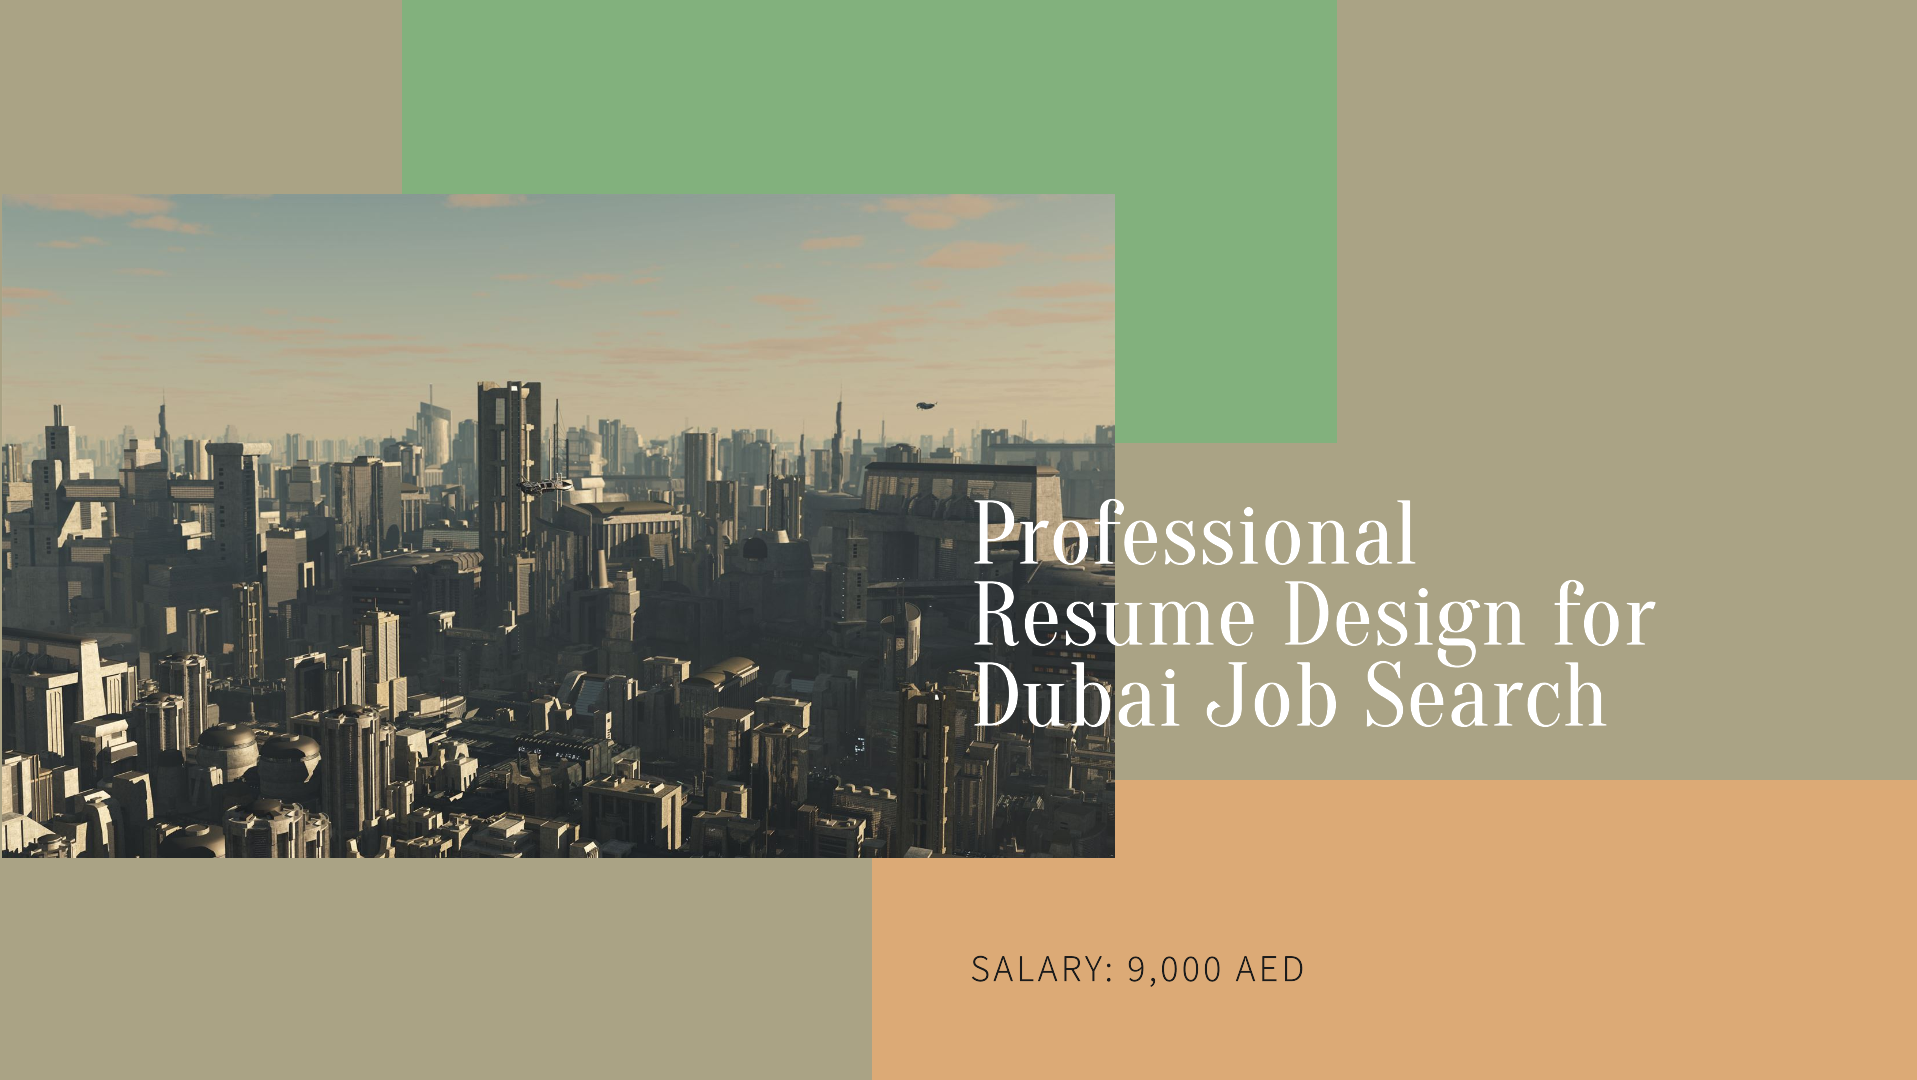 careers in dubai with salary 9,000 AED